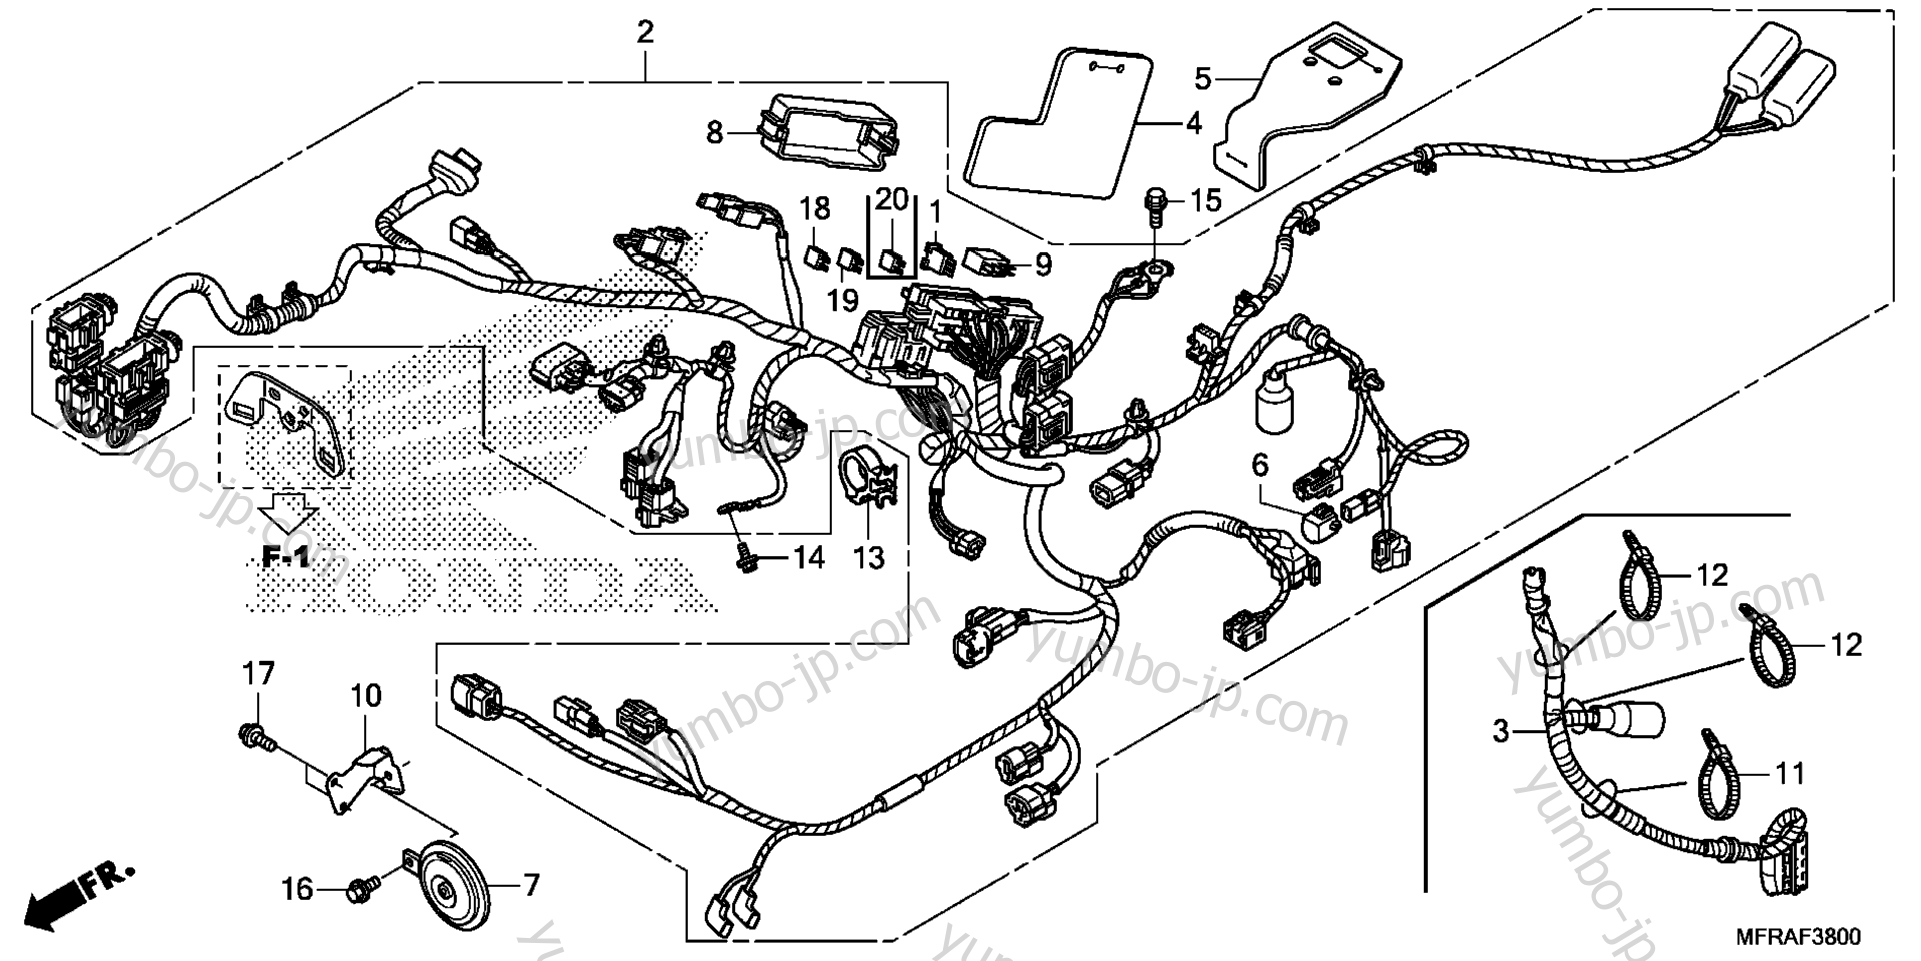 WIRE HARNESS (1) for motorcycles HONDA VT1300CTA AC 2013 year